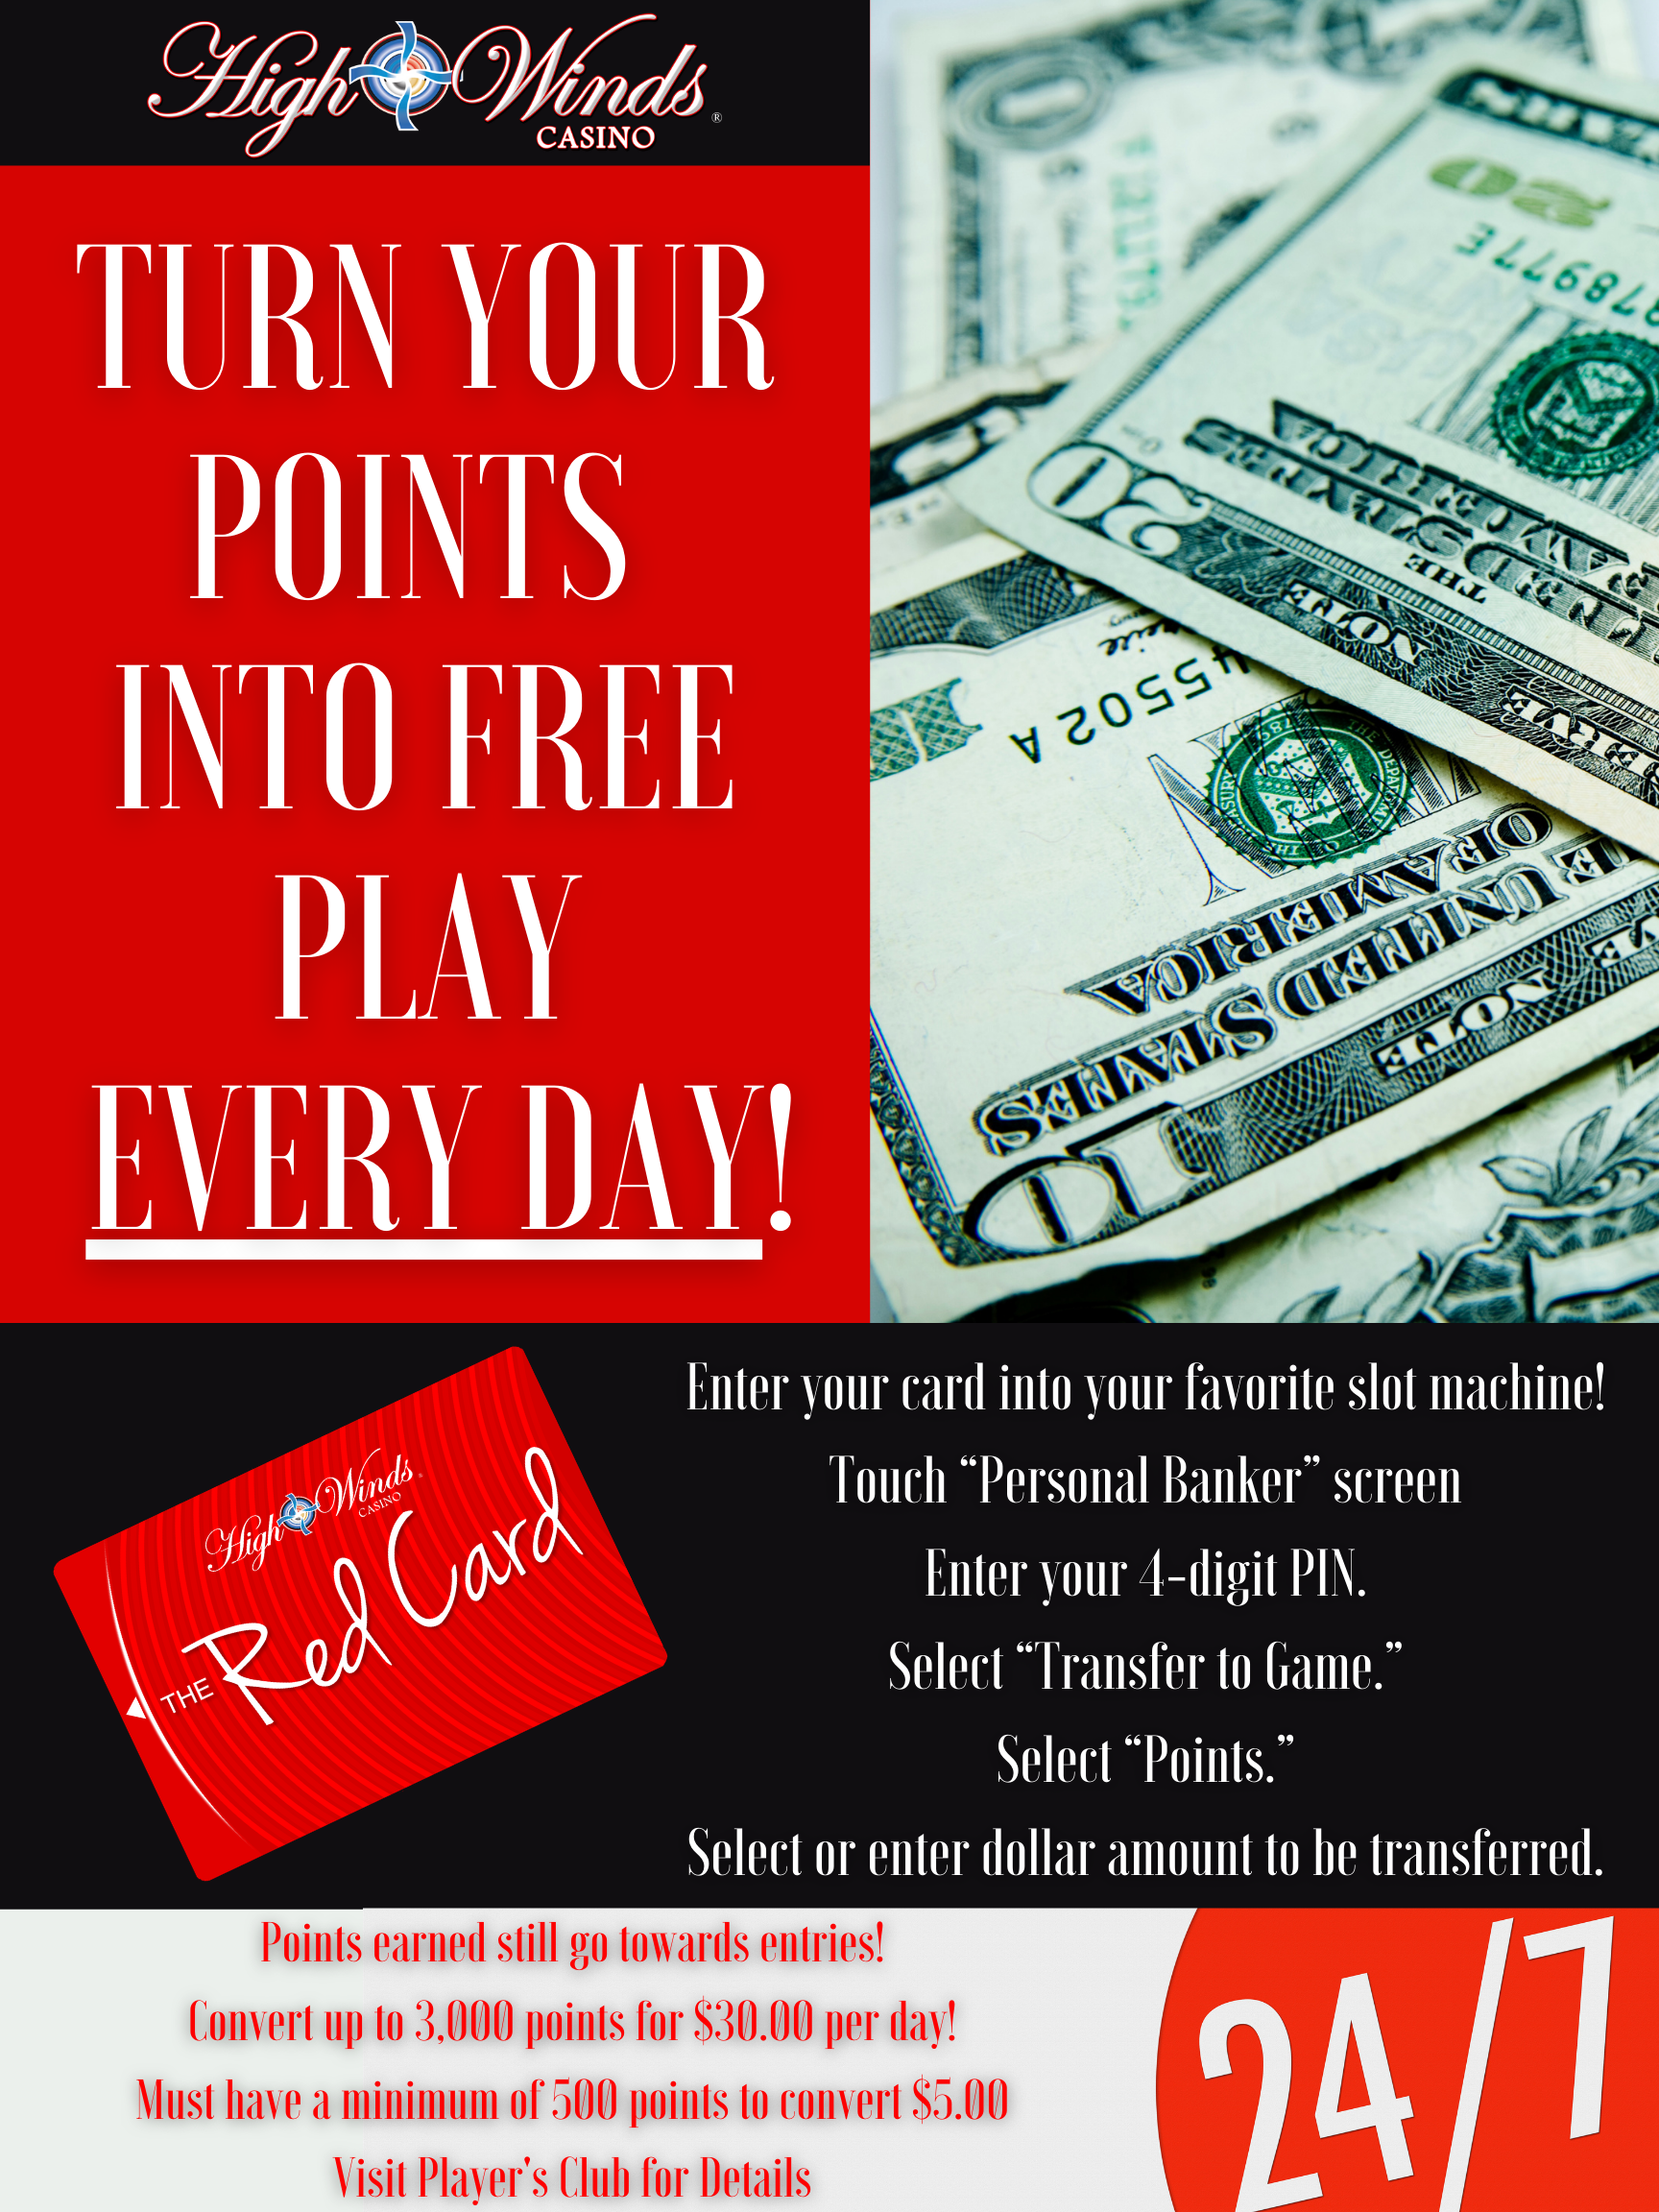 Turn Your Points Into Free Play Every Day